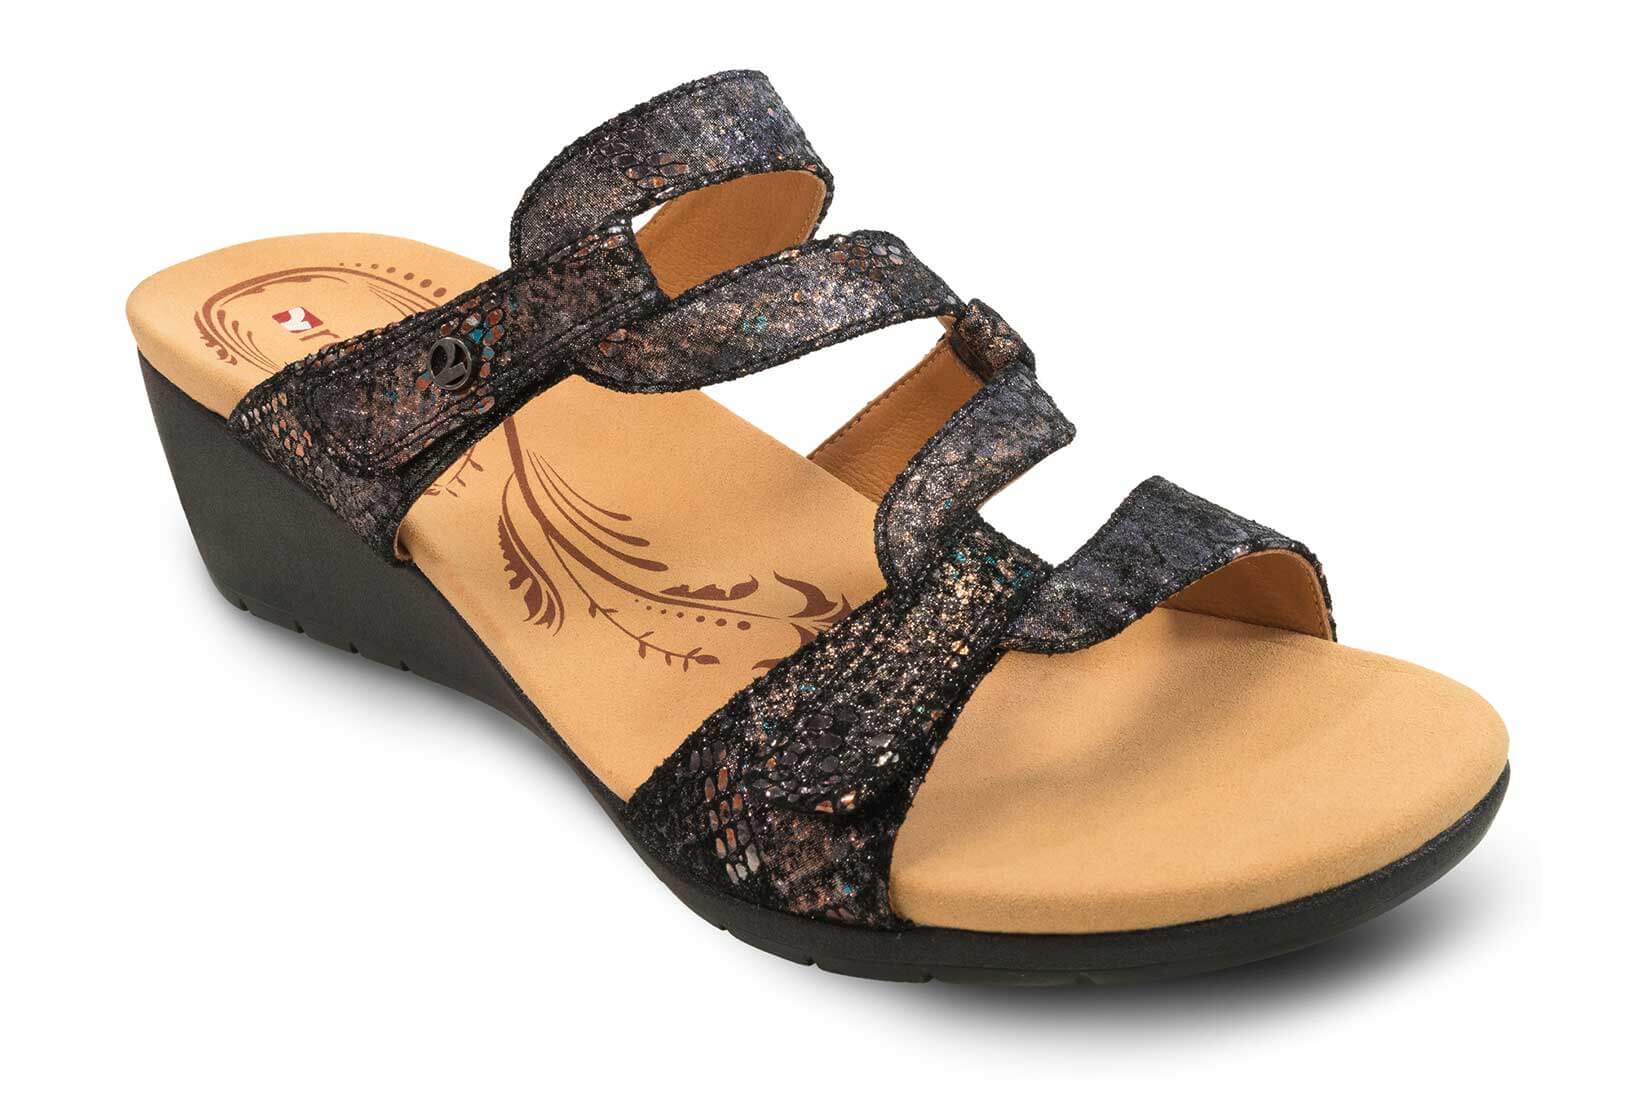 Revere Sofia - Women's Sandal - Medium - Extra Depth With Removable Foot Beds